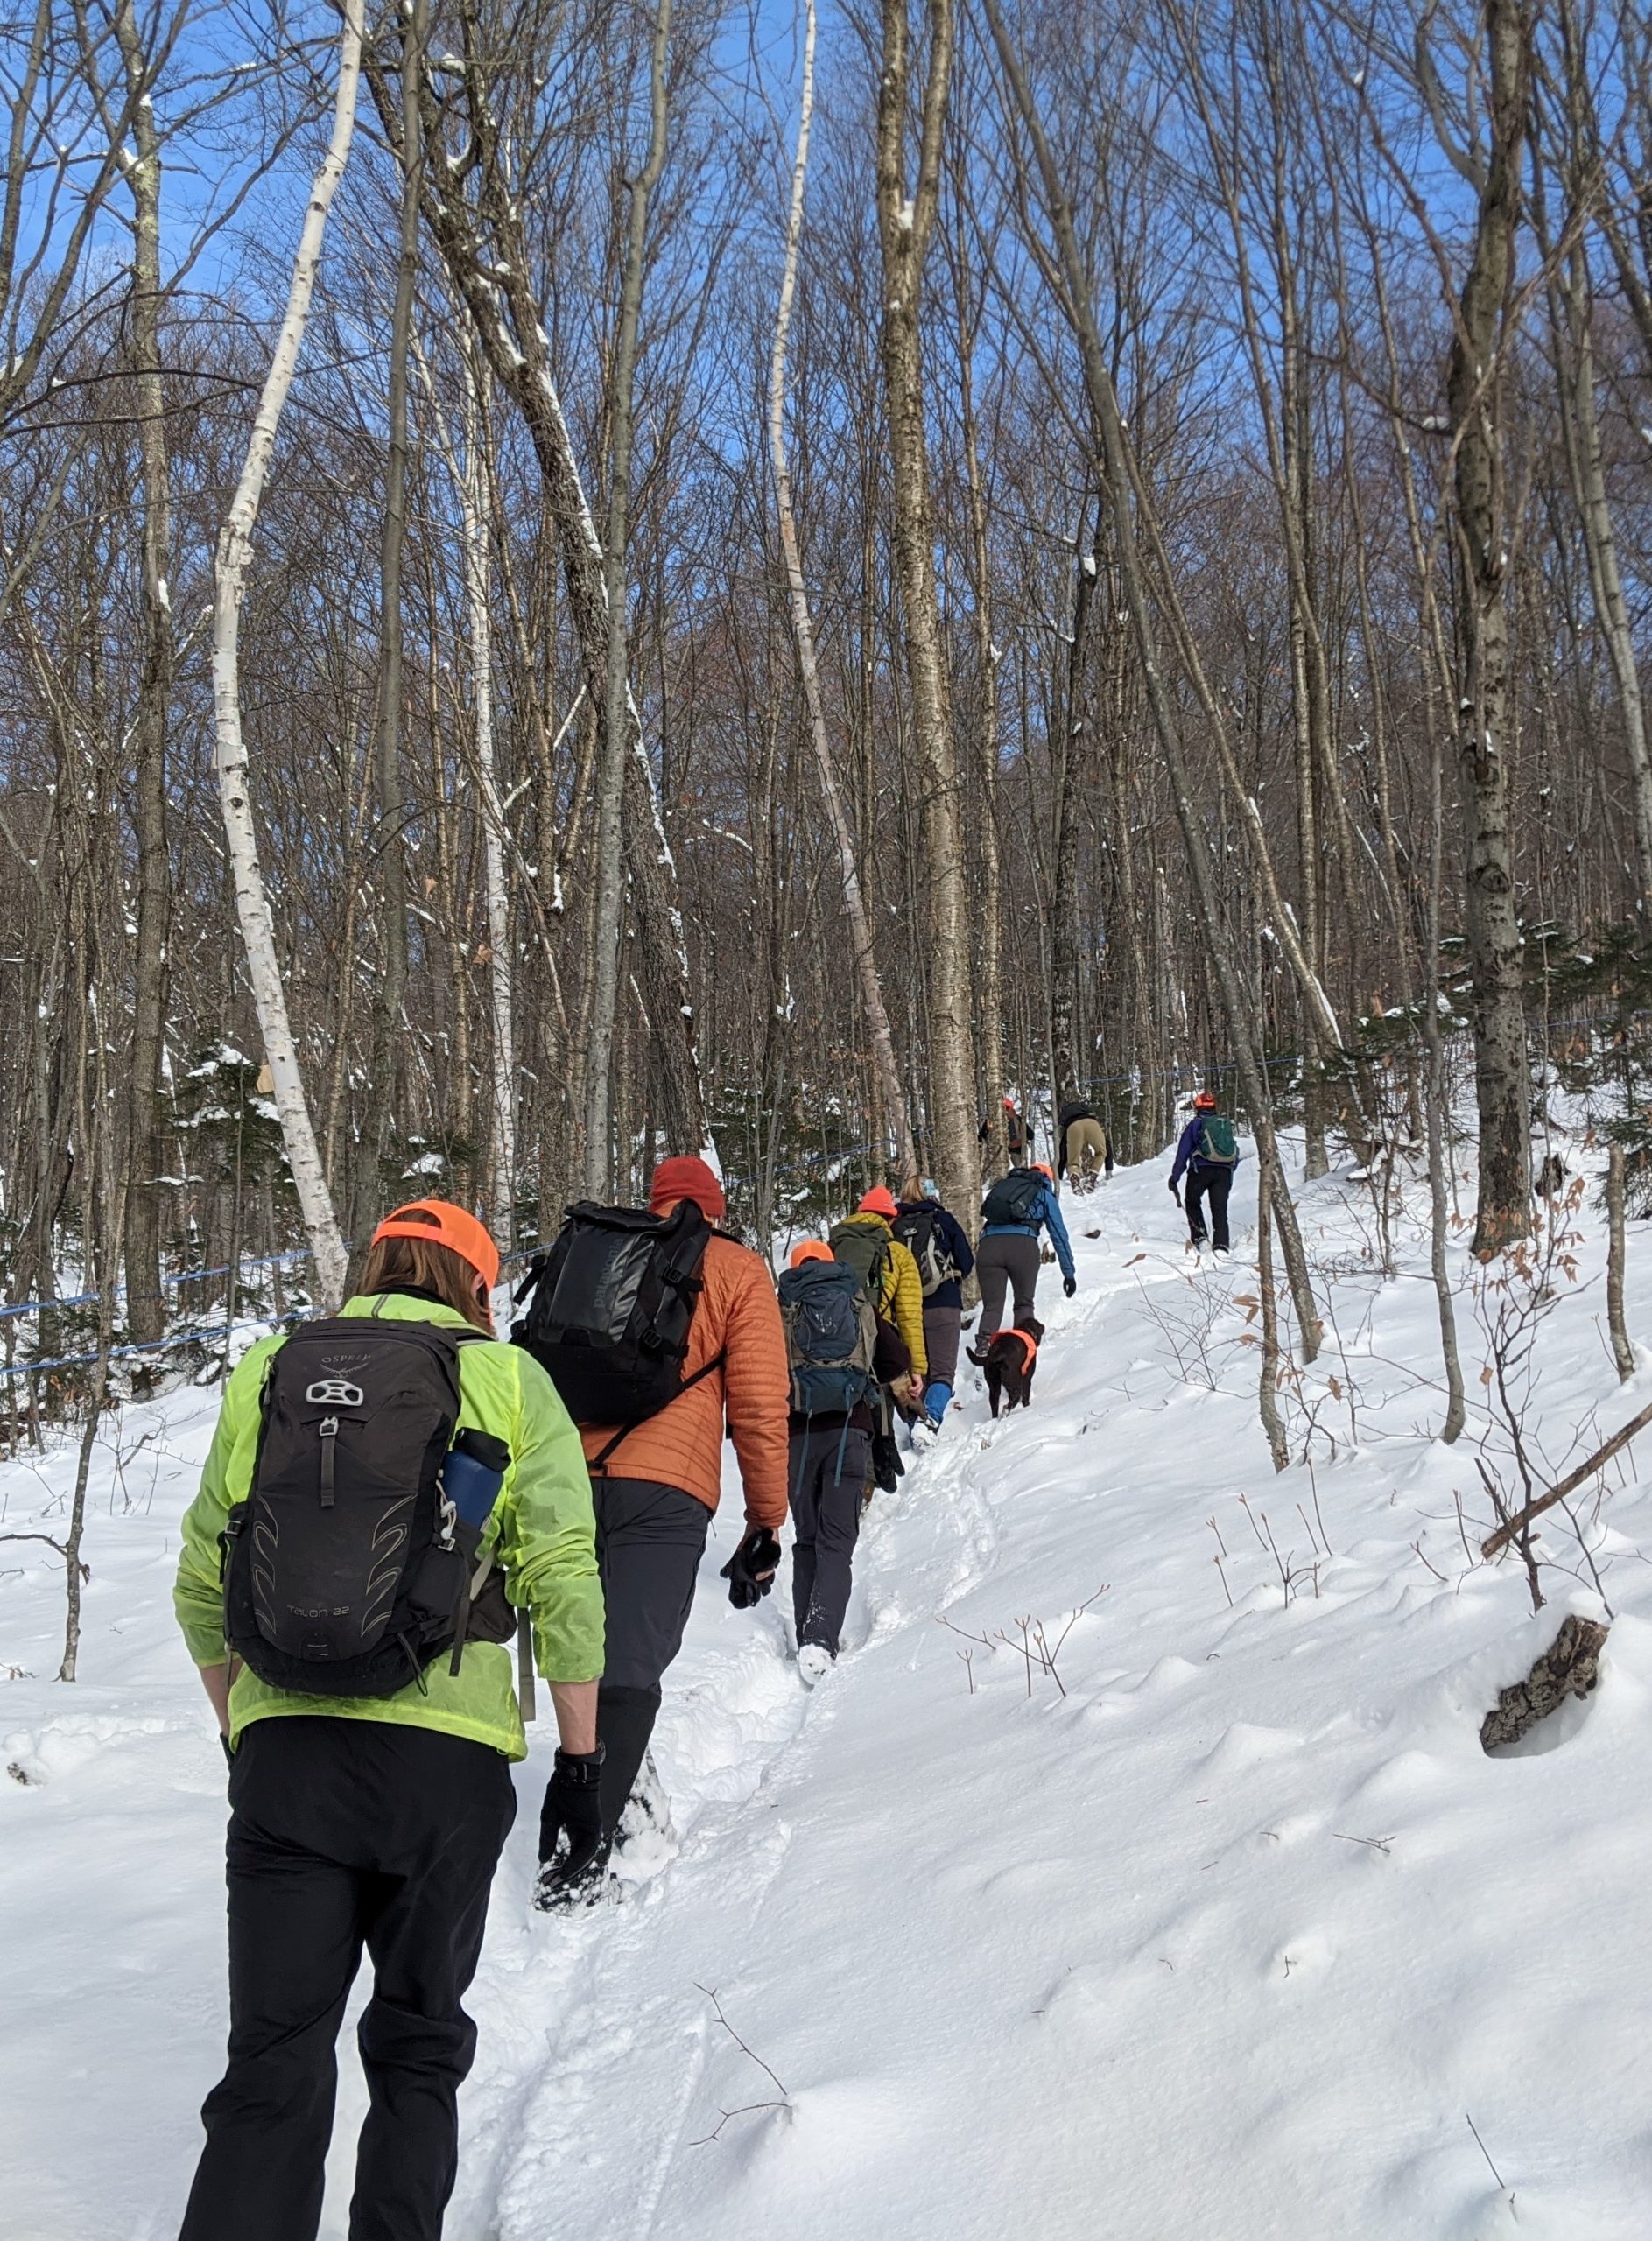 Day Hikes - Winter - Green Mountain Club